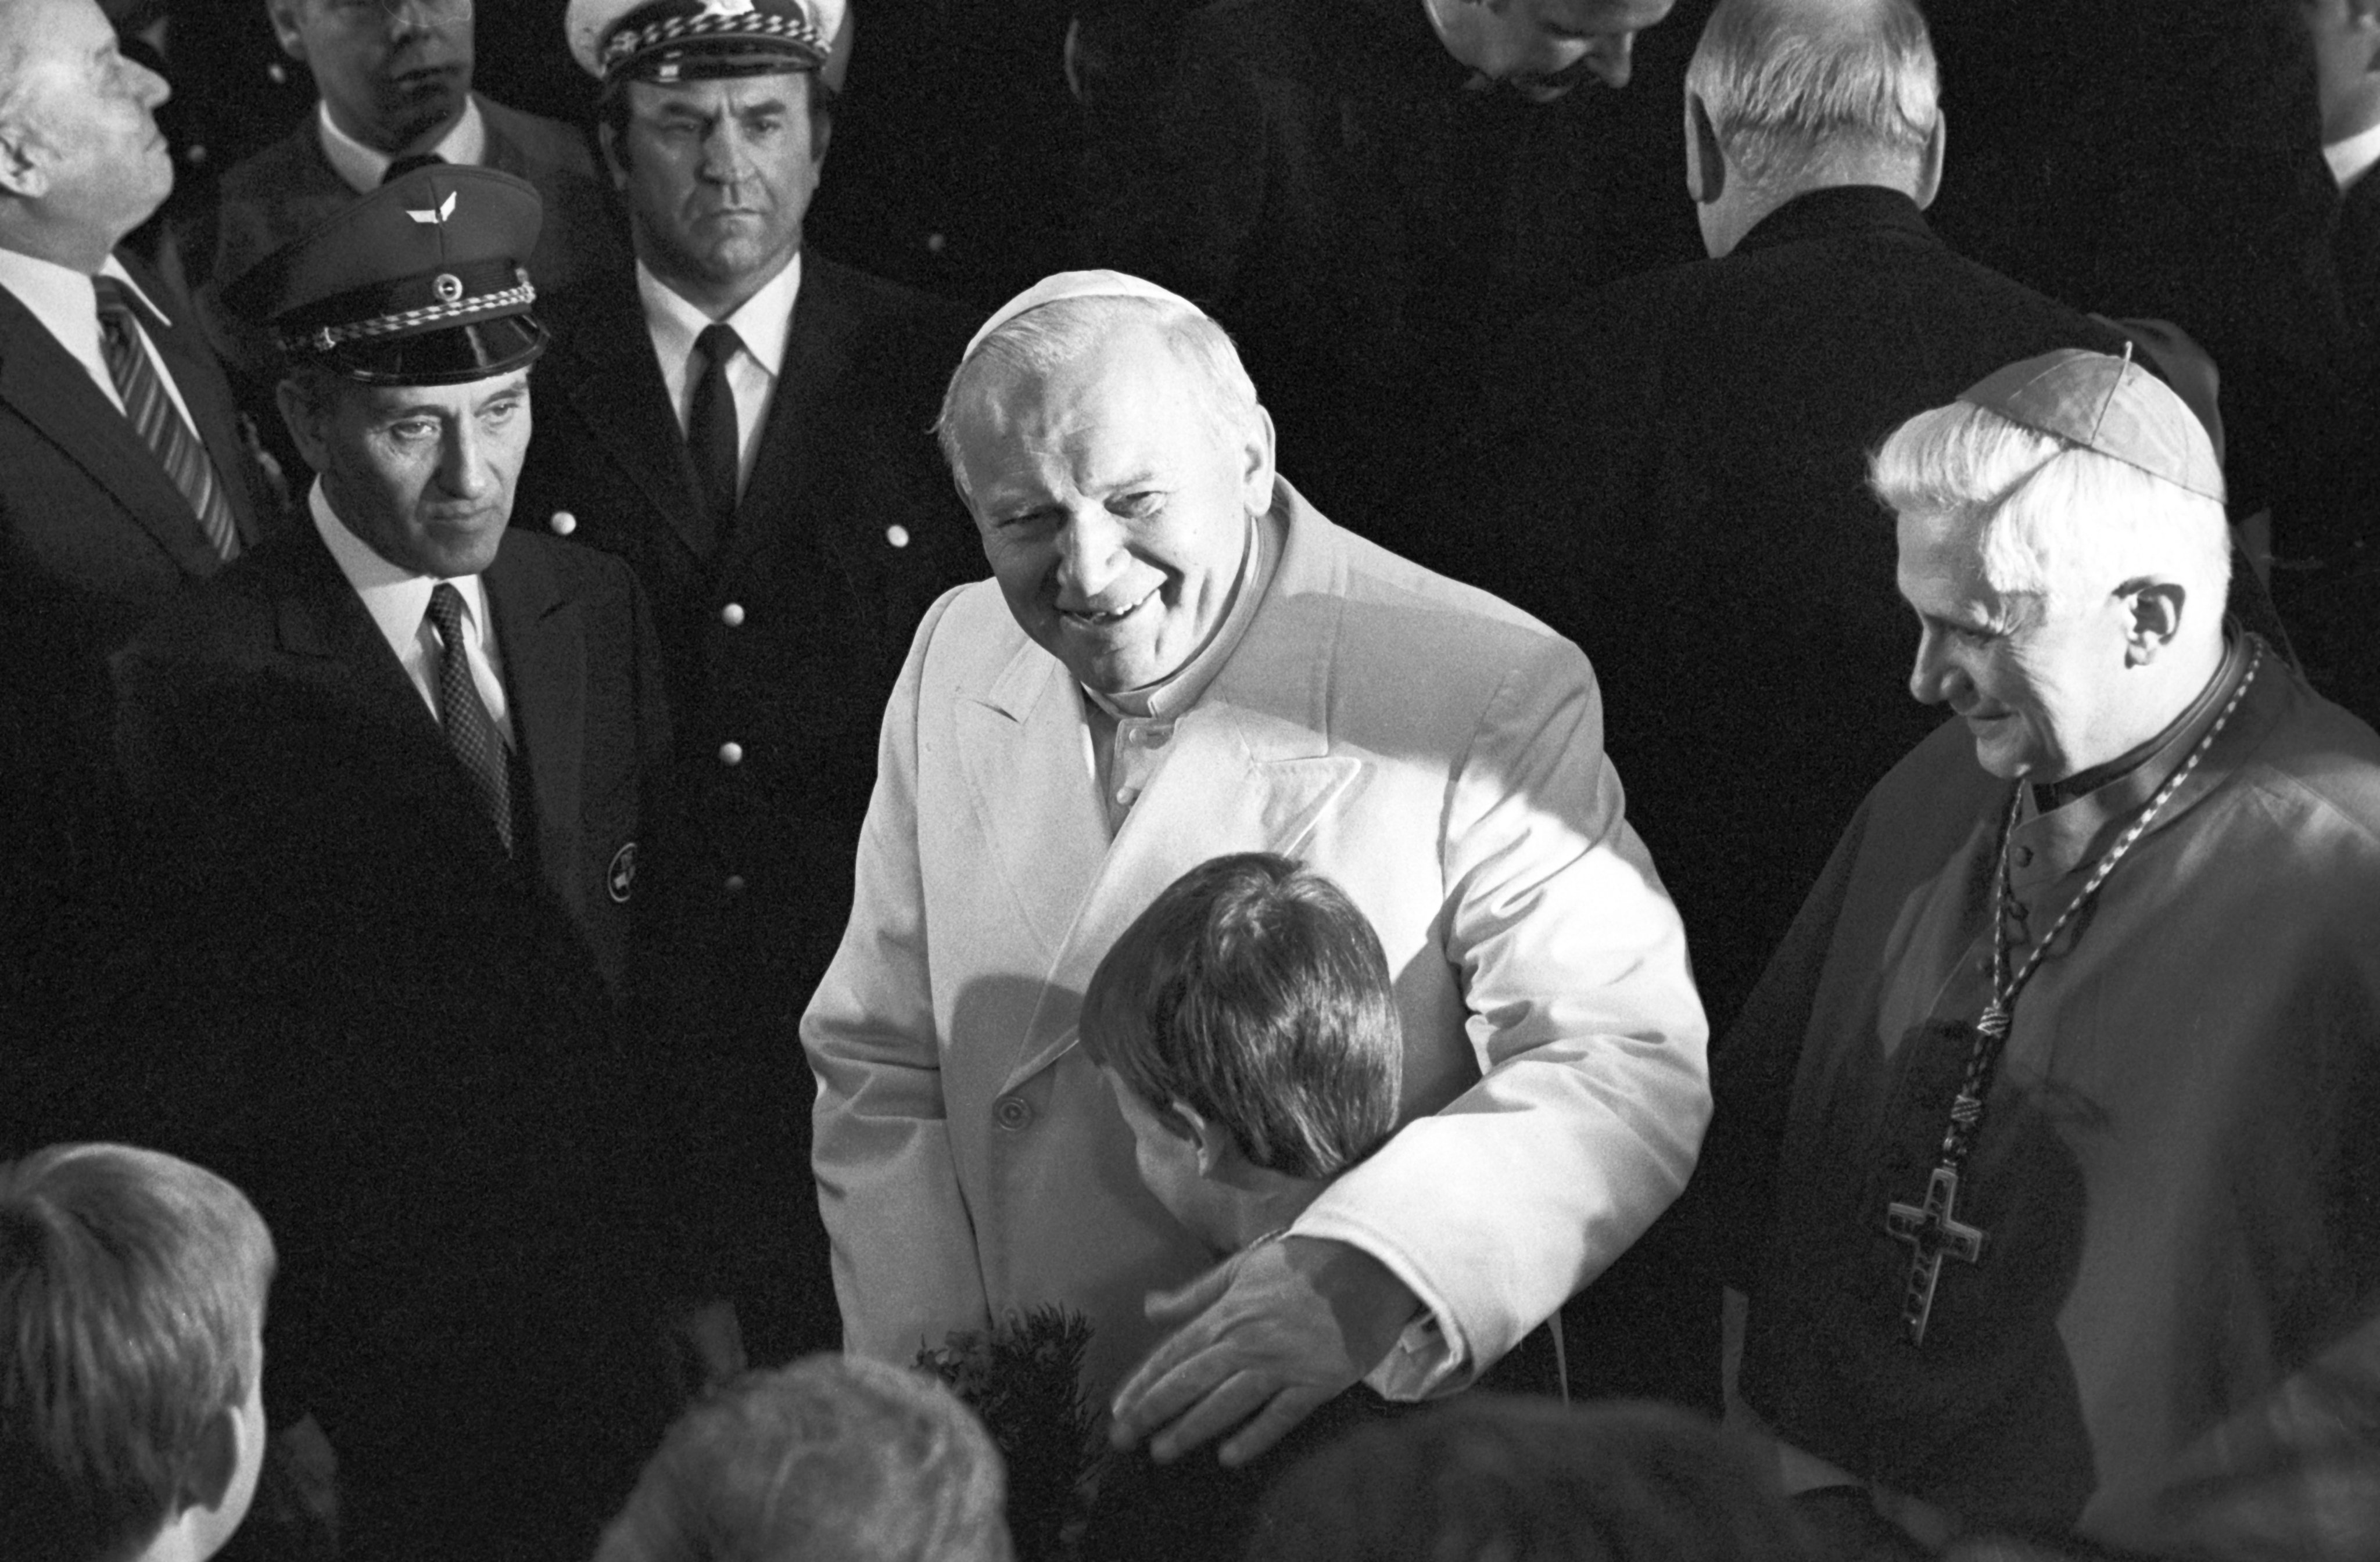 Pope John Paul II. visits Bavaria: Arrival with Archbishop Ratzinger in Munich